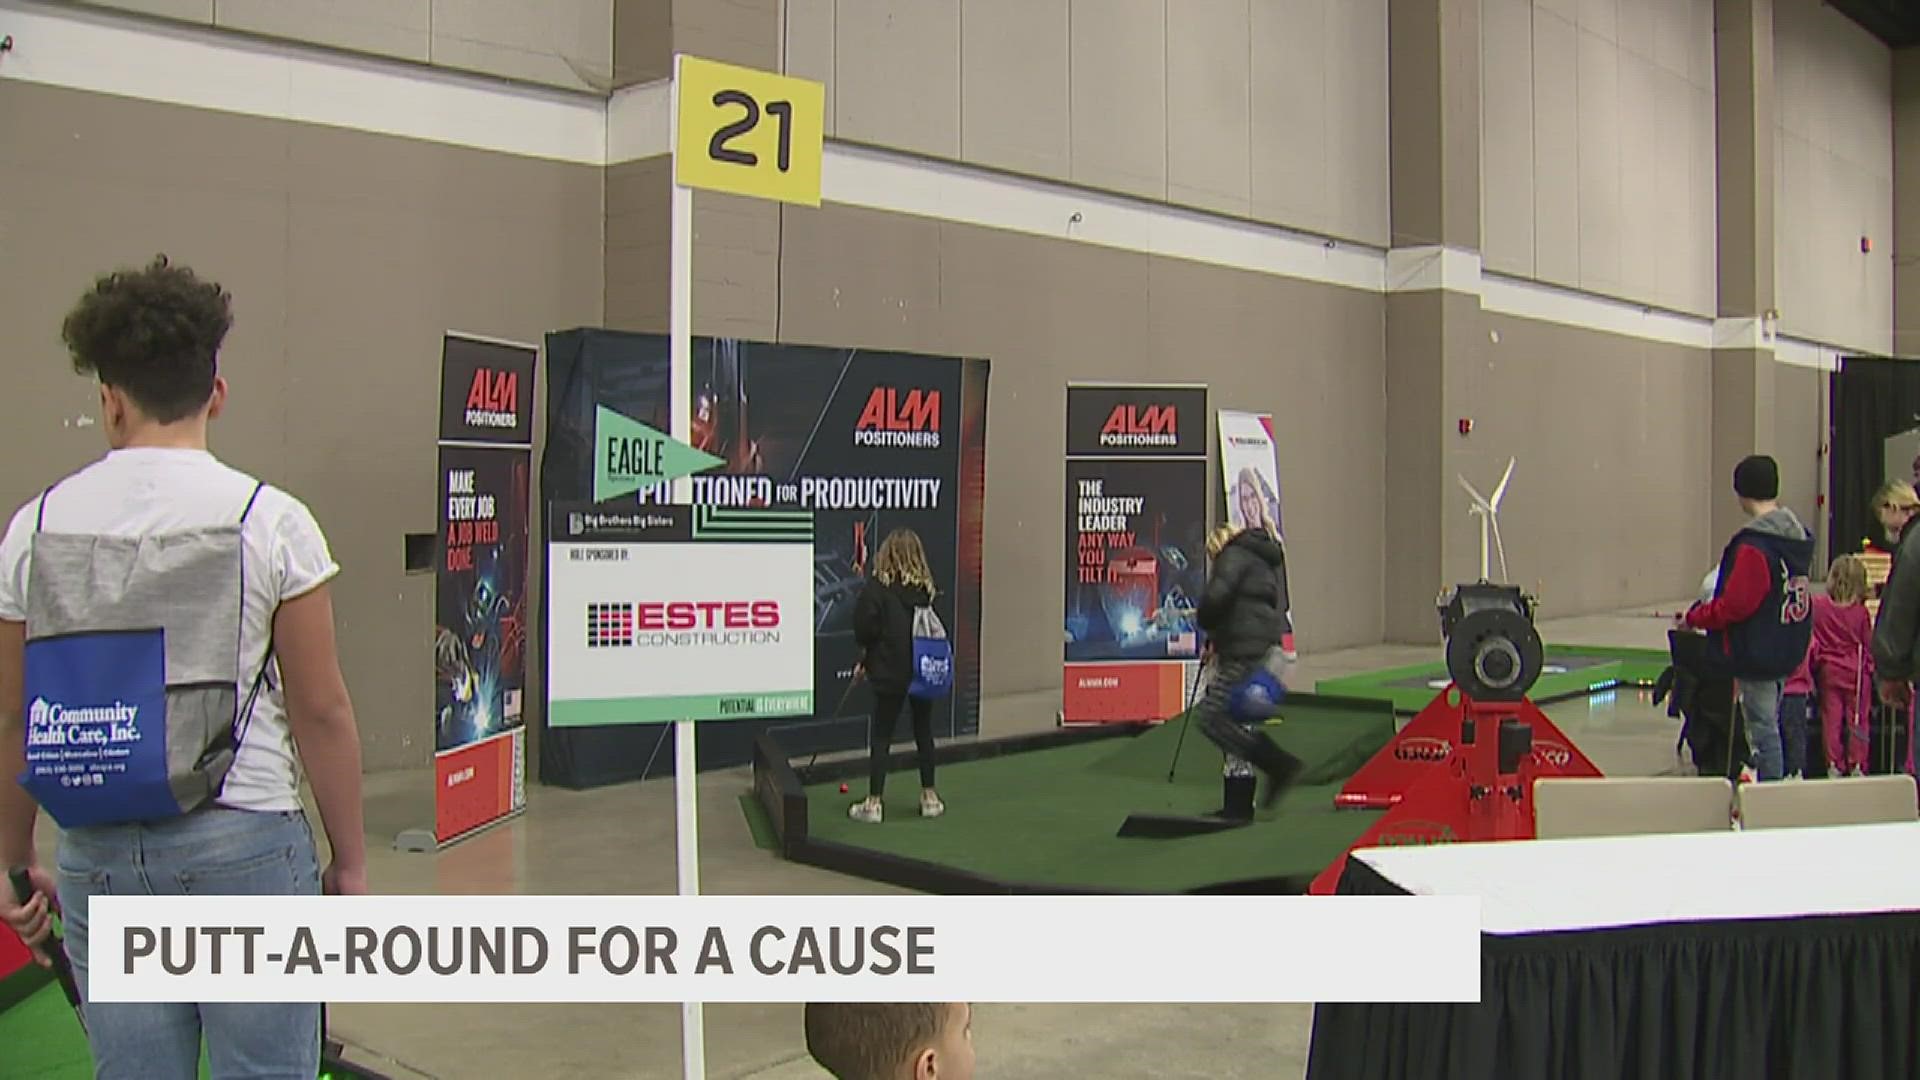 The organization kicked off its annual Putt-A-Round fundraiser on Tuesday, featuring a 24-hole mini-golf course built by local businesses, hoping to raise $100,000.